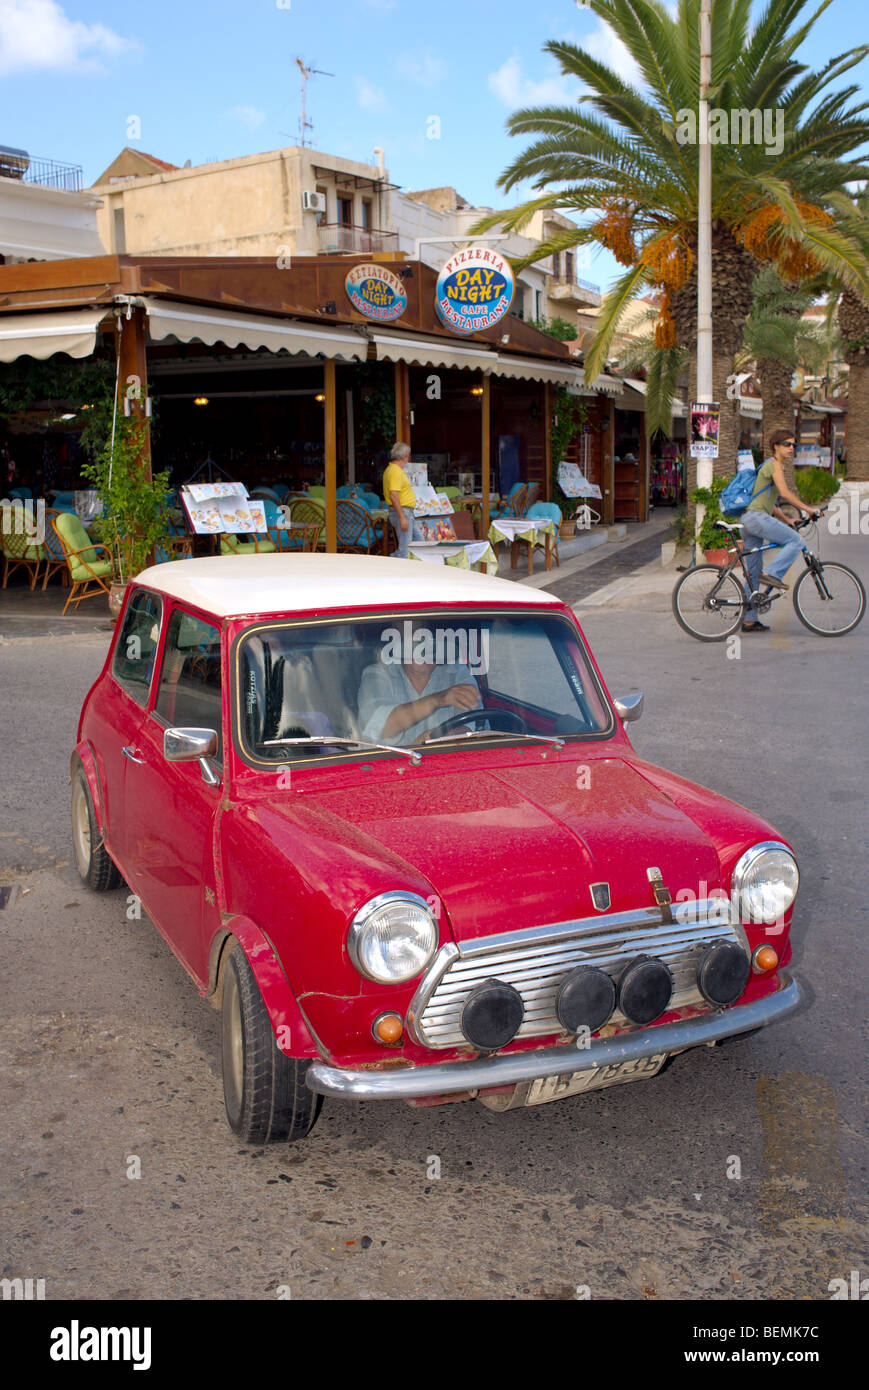 A Red Mini Cooper wth a Union Jack Roof by John Cooper version of the mini  parked on a cobbled street in Huddersfield Stock Photo - Alamy